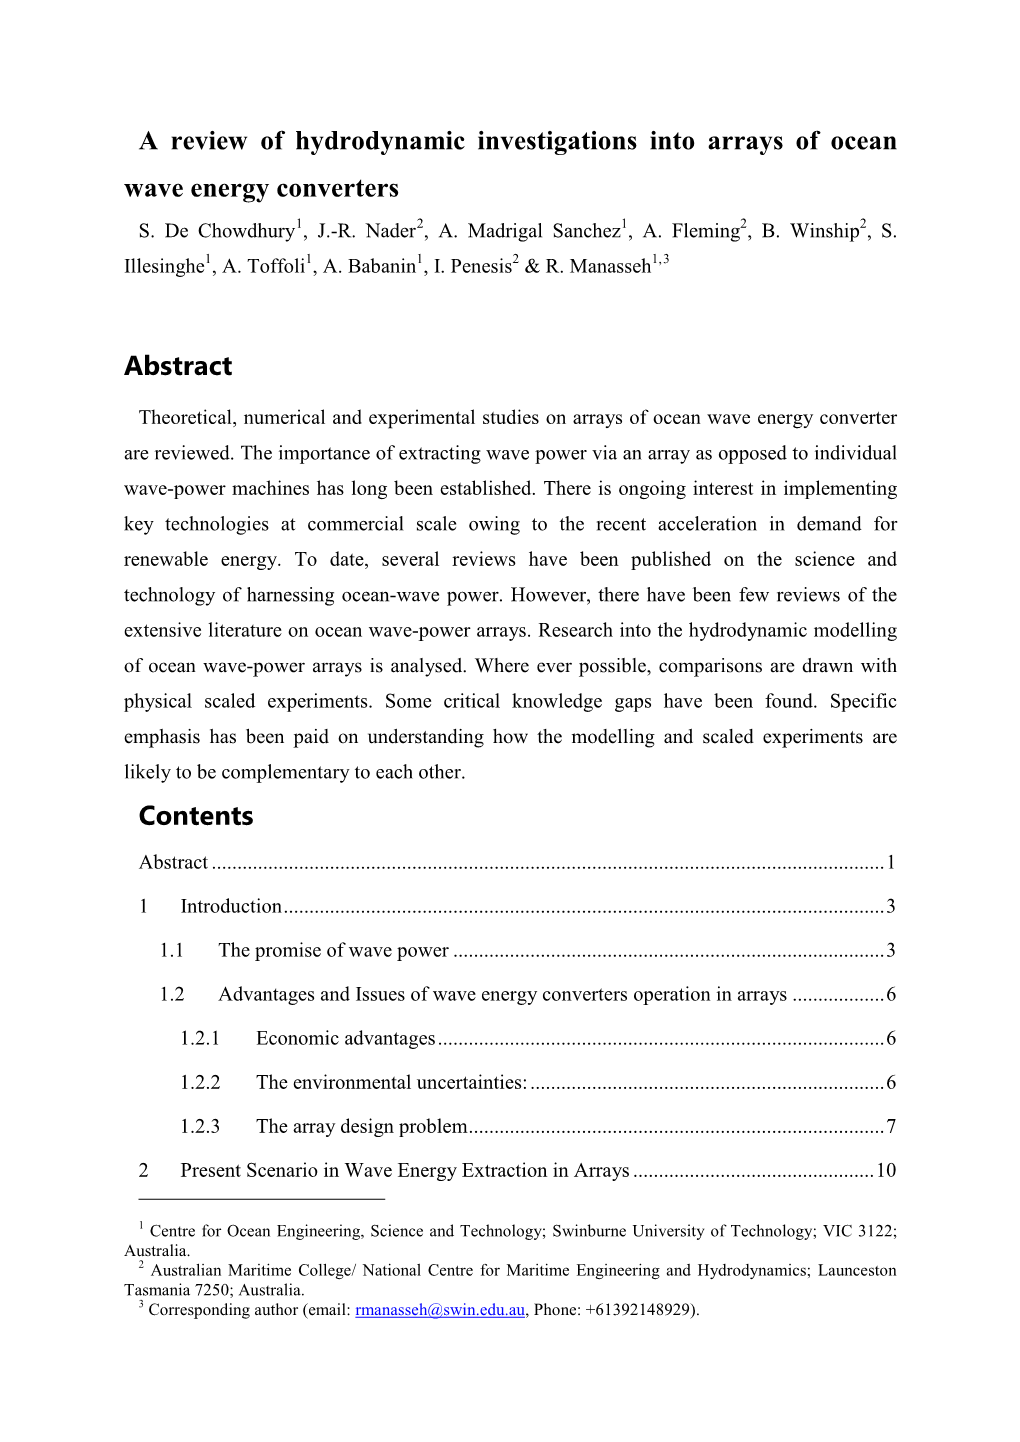 A Review of Hydrodynamic Investigations Into Arrays of Ocean Wave Energy Converters S